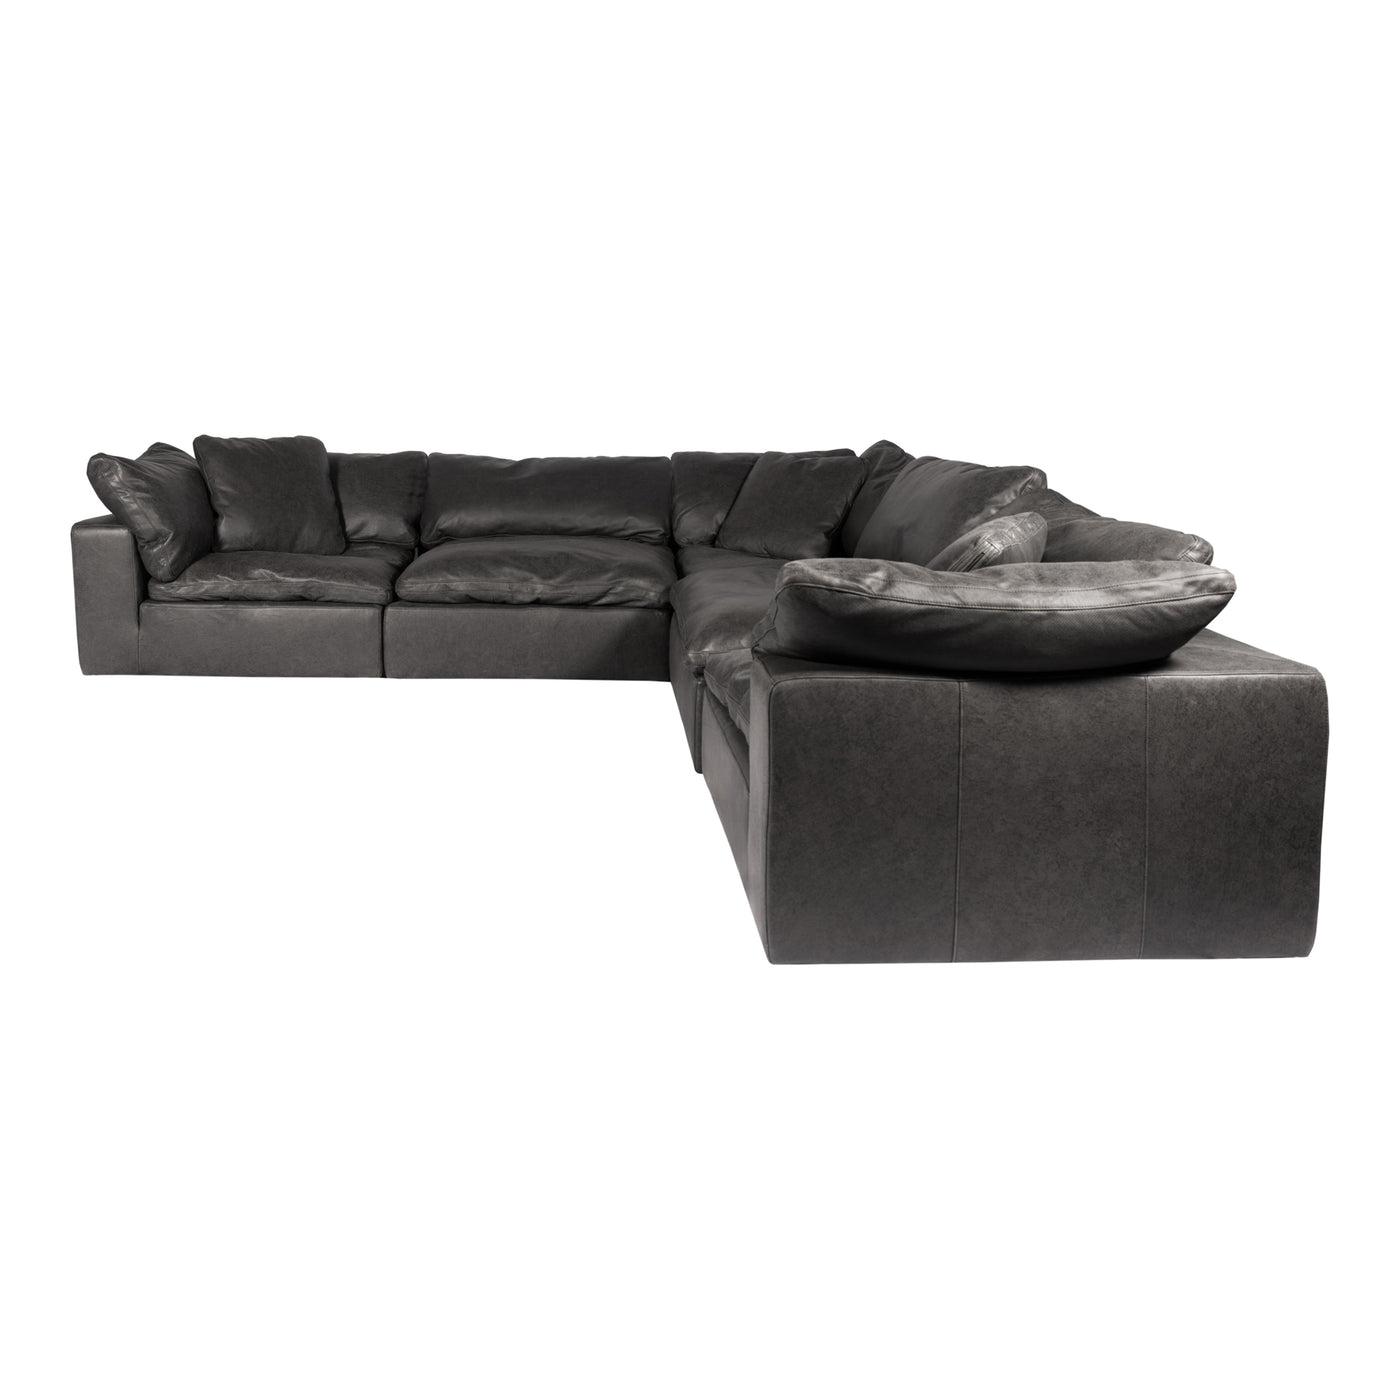 Our Clay Classic L Modular Sectional is upholstered with a soft, smooth, top-grain nubuck leather. Its cushions are filled...